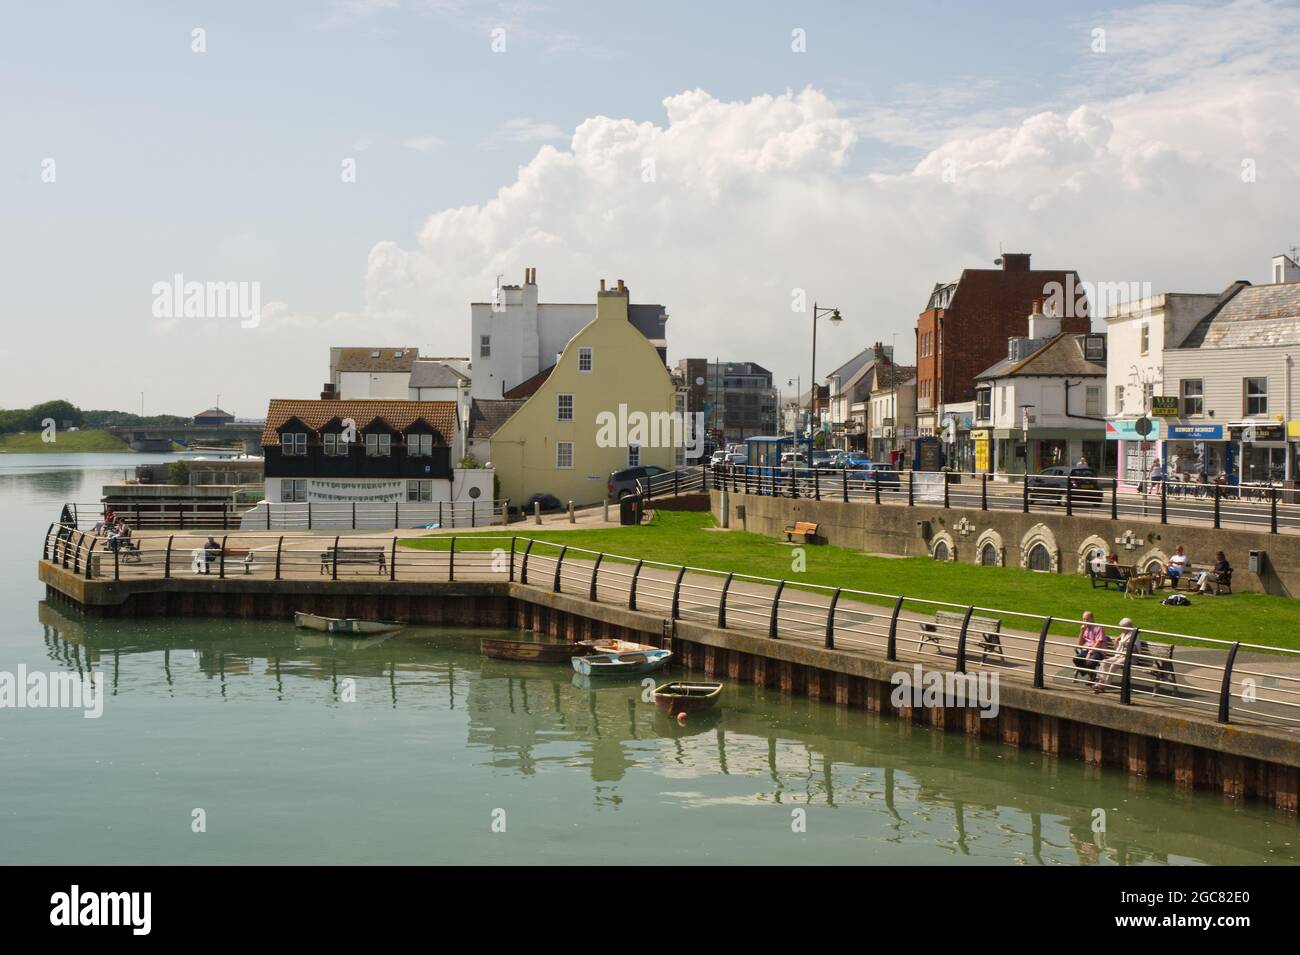 River Adur waterfront at Shoreham, West Sussex, England with people on promenade and street. Stock Photo